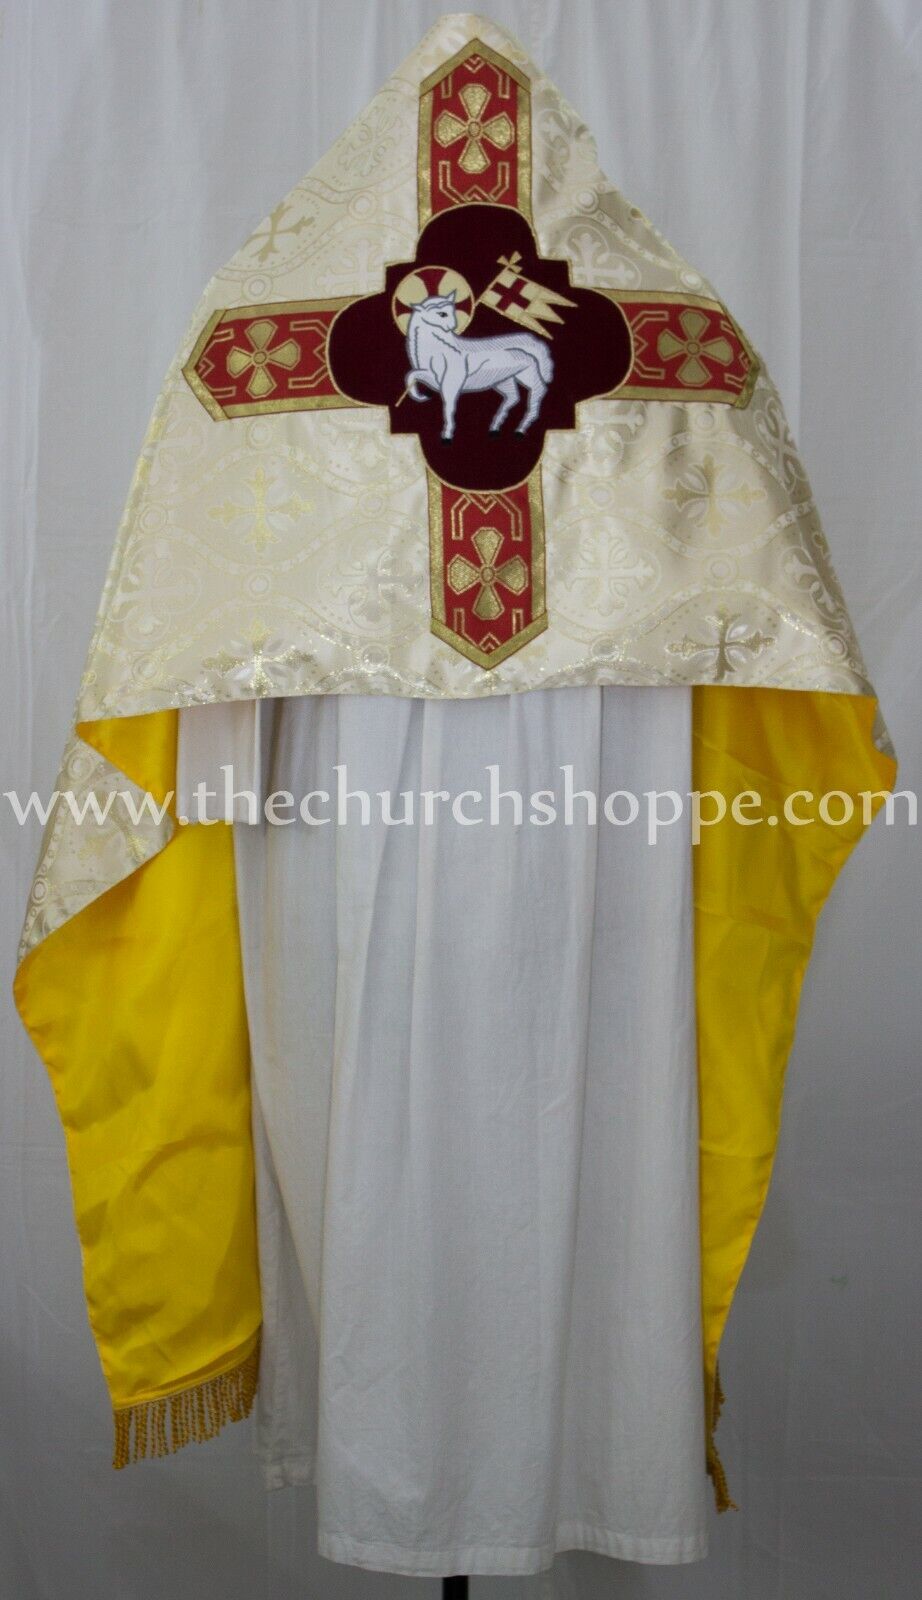 Metallic Gold Humeral Veil wt Agnus Dei embroidery,voile huméral,velo omerale